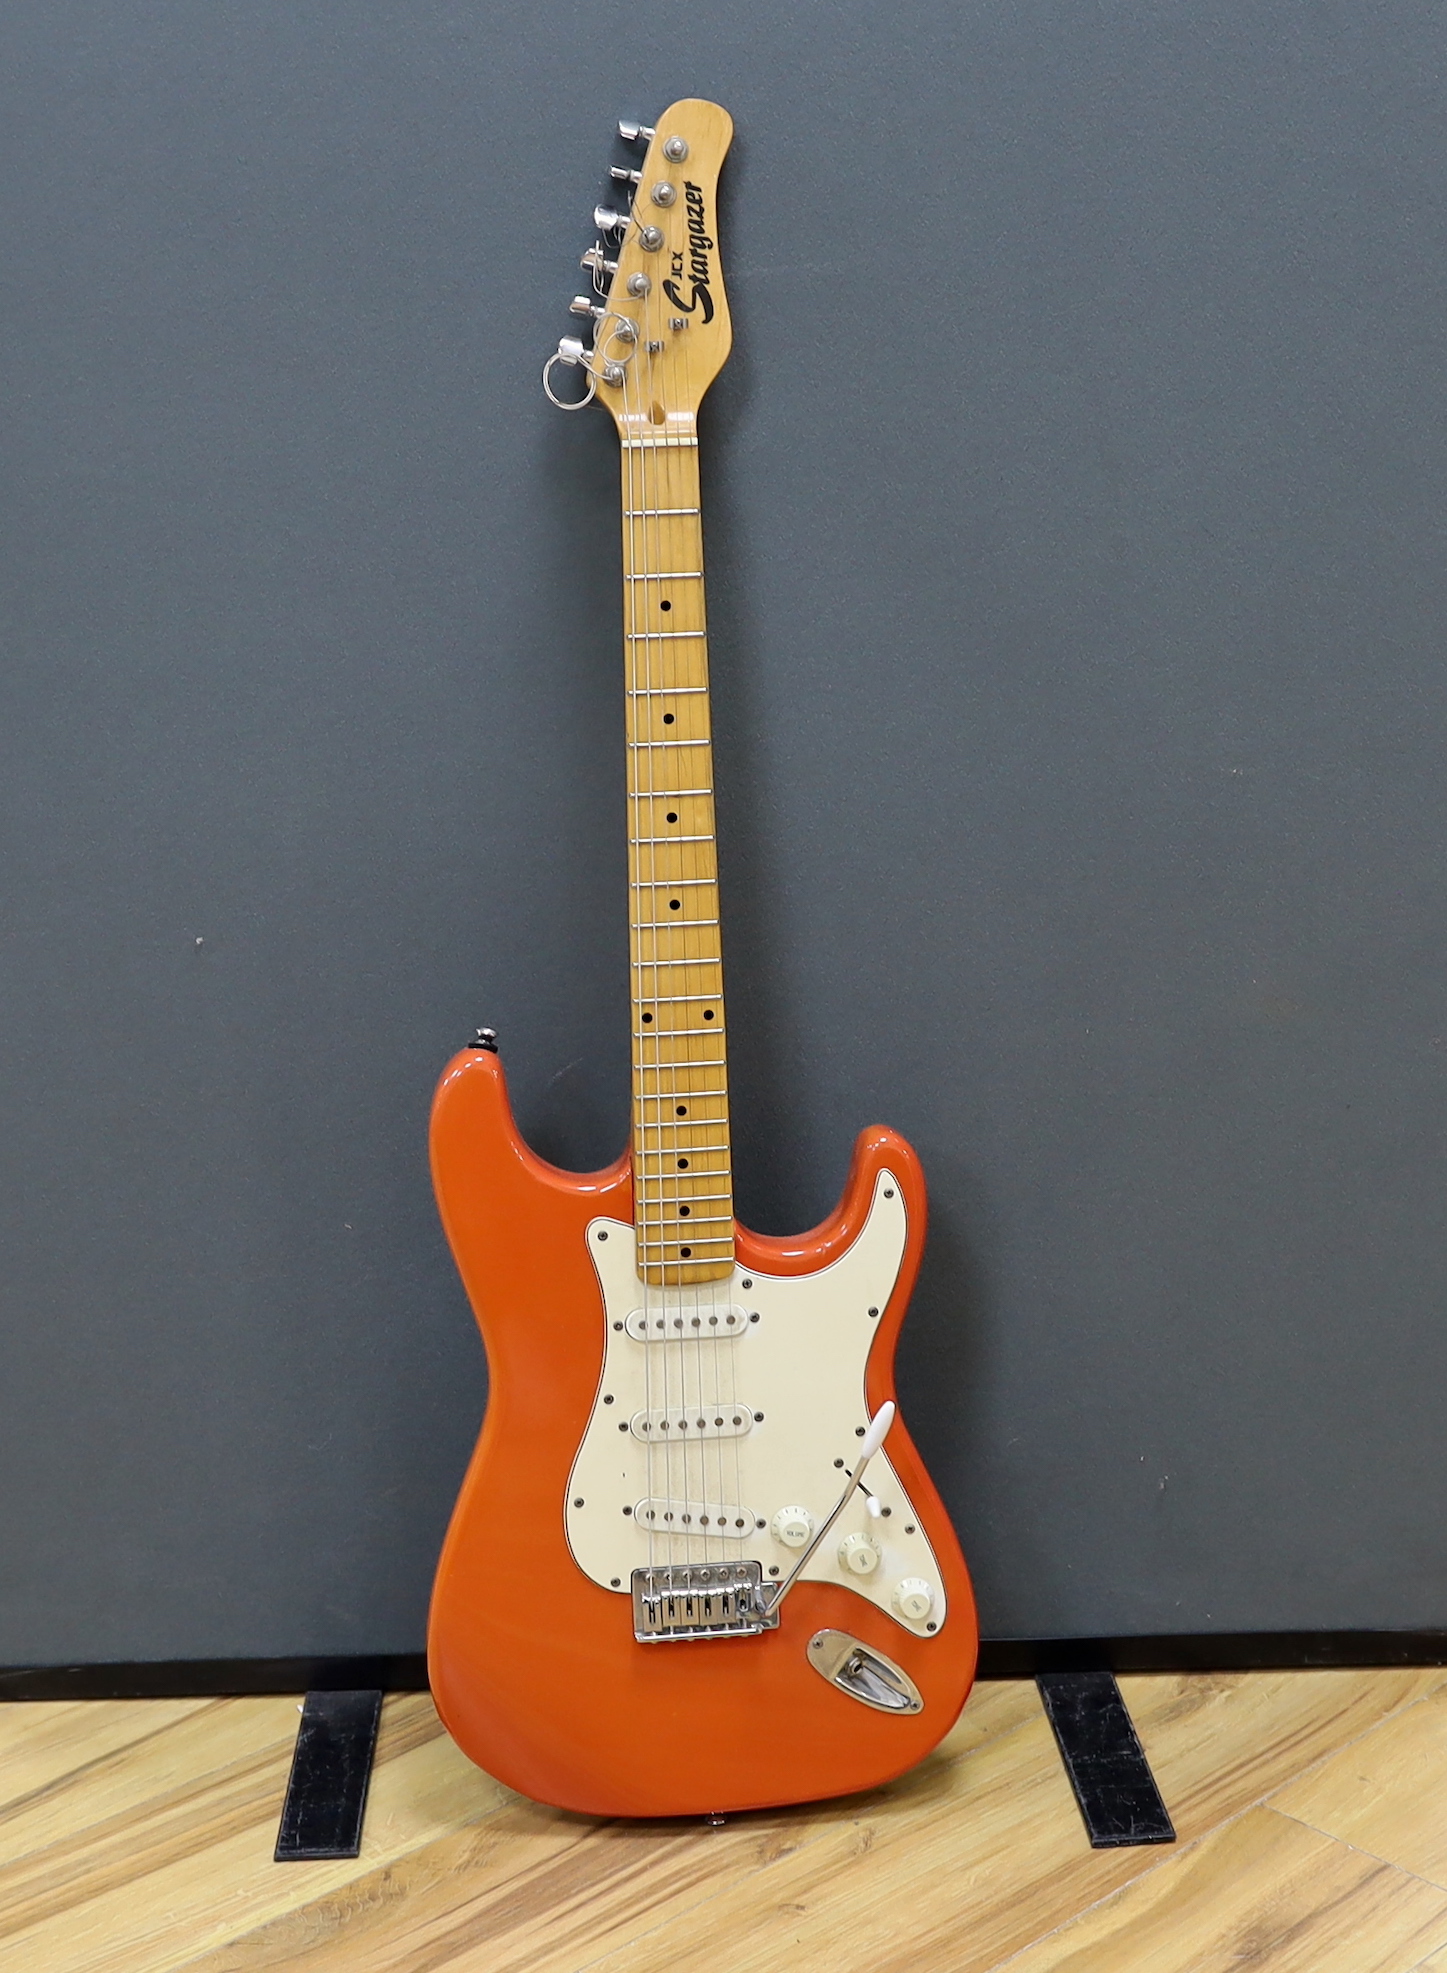 A JCX Stargazer electric guitar with maple neck and orange lacquered body